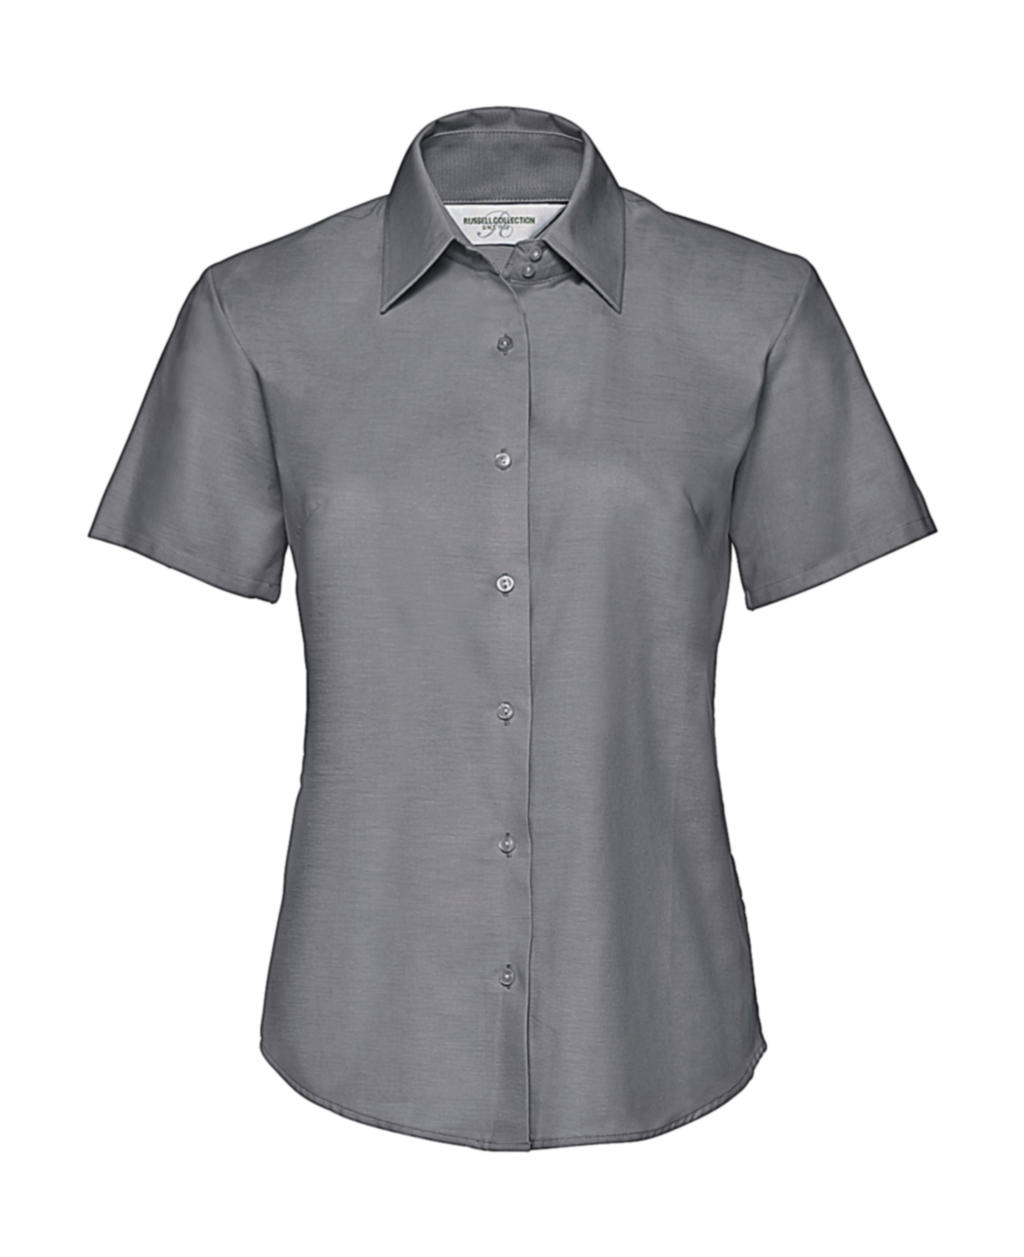  Ladies Classic Oxford Shirt in Farbe Silver